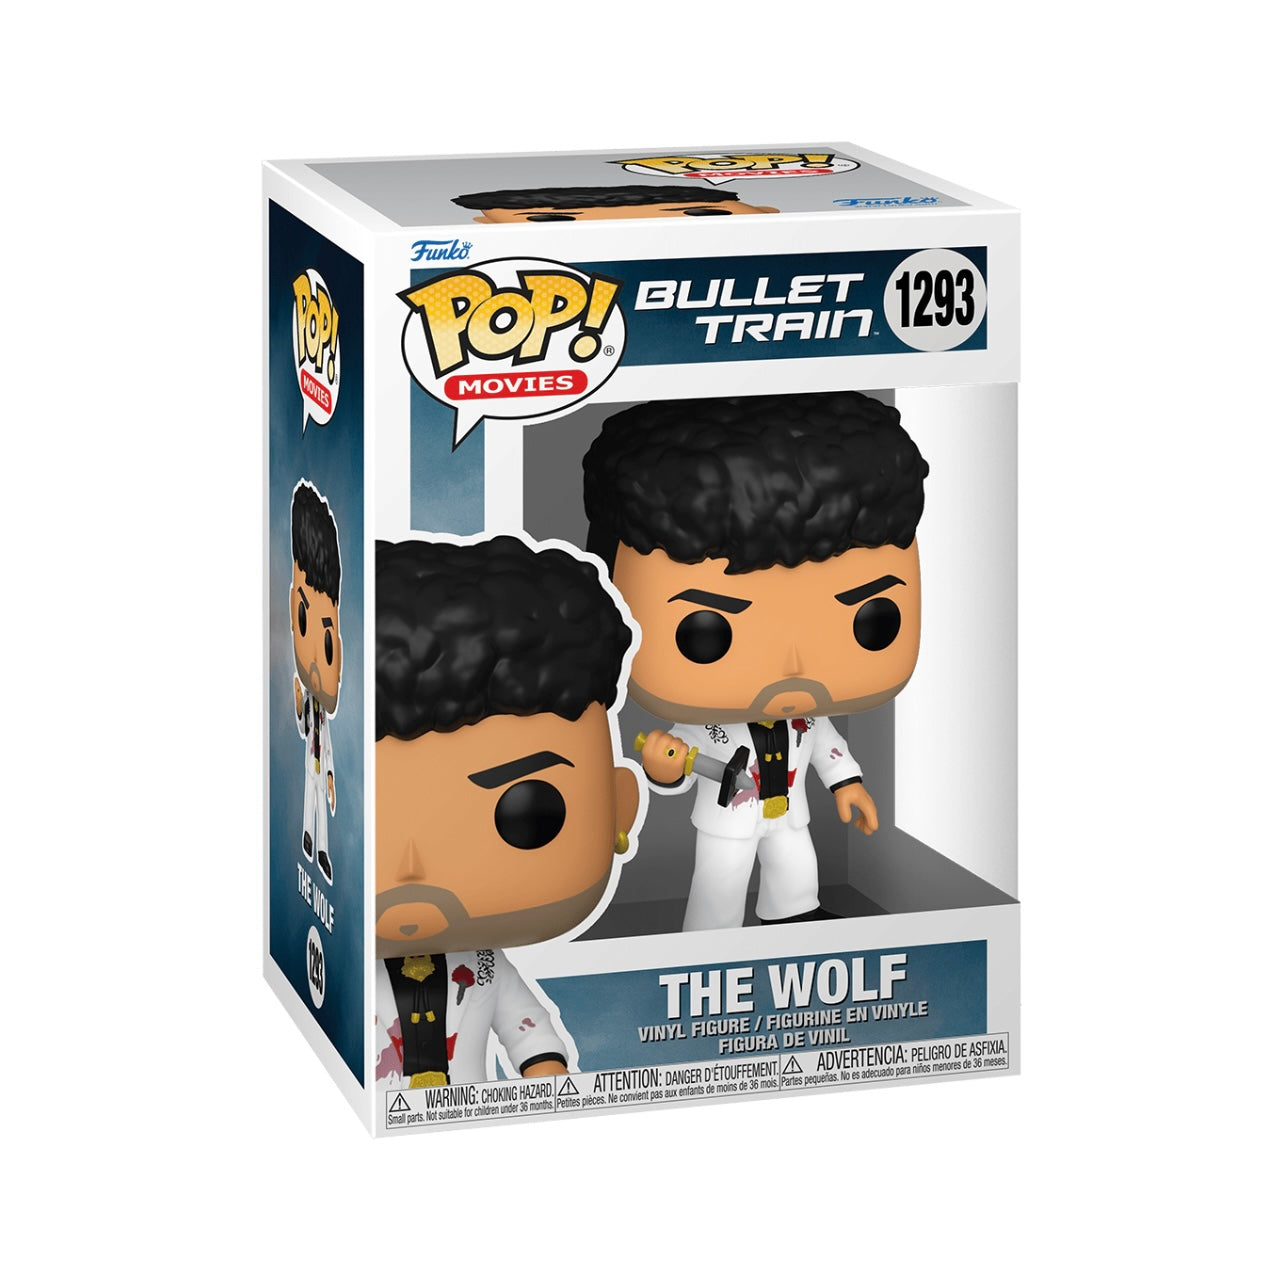 POP! Movies Bullet Train The Wolf #1293